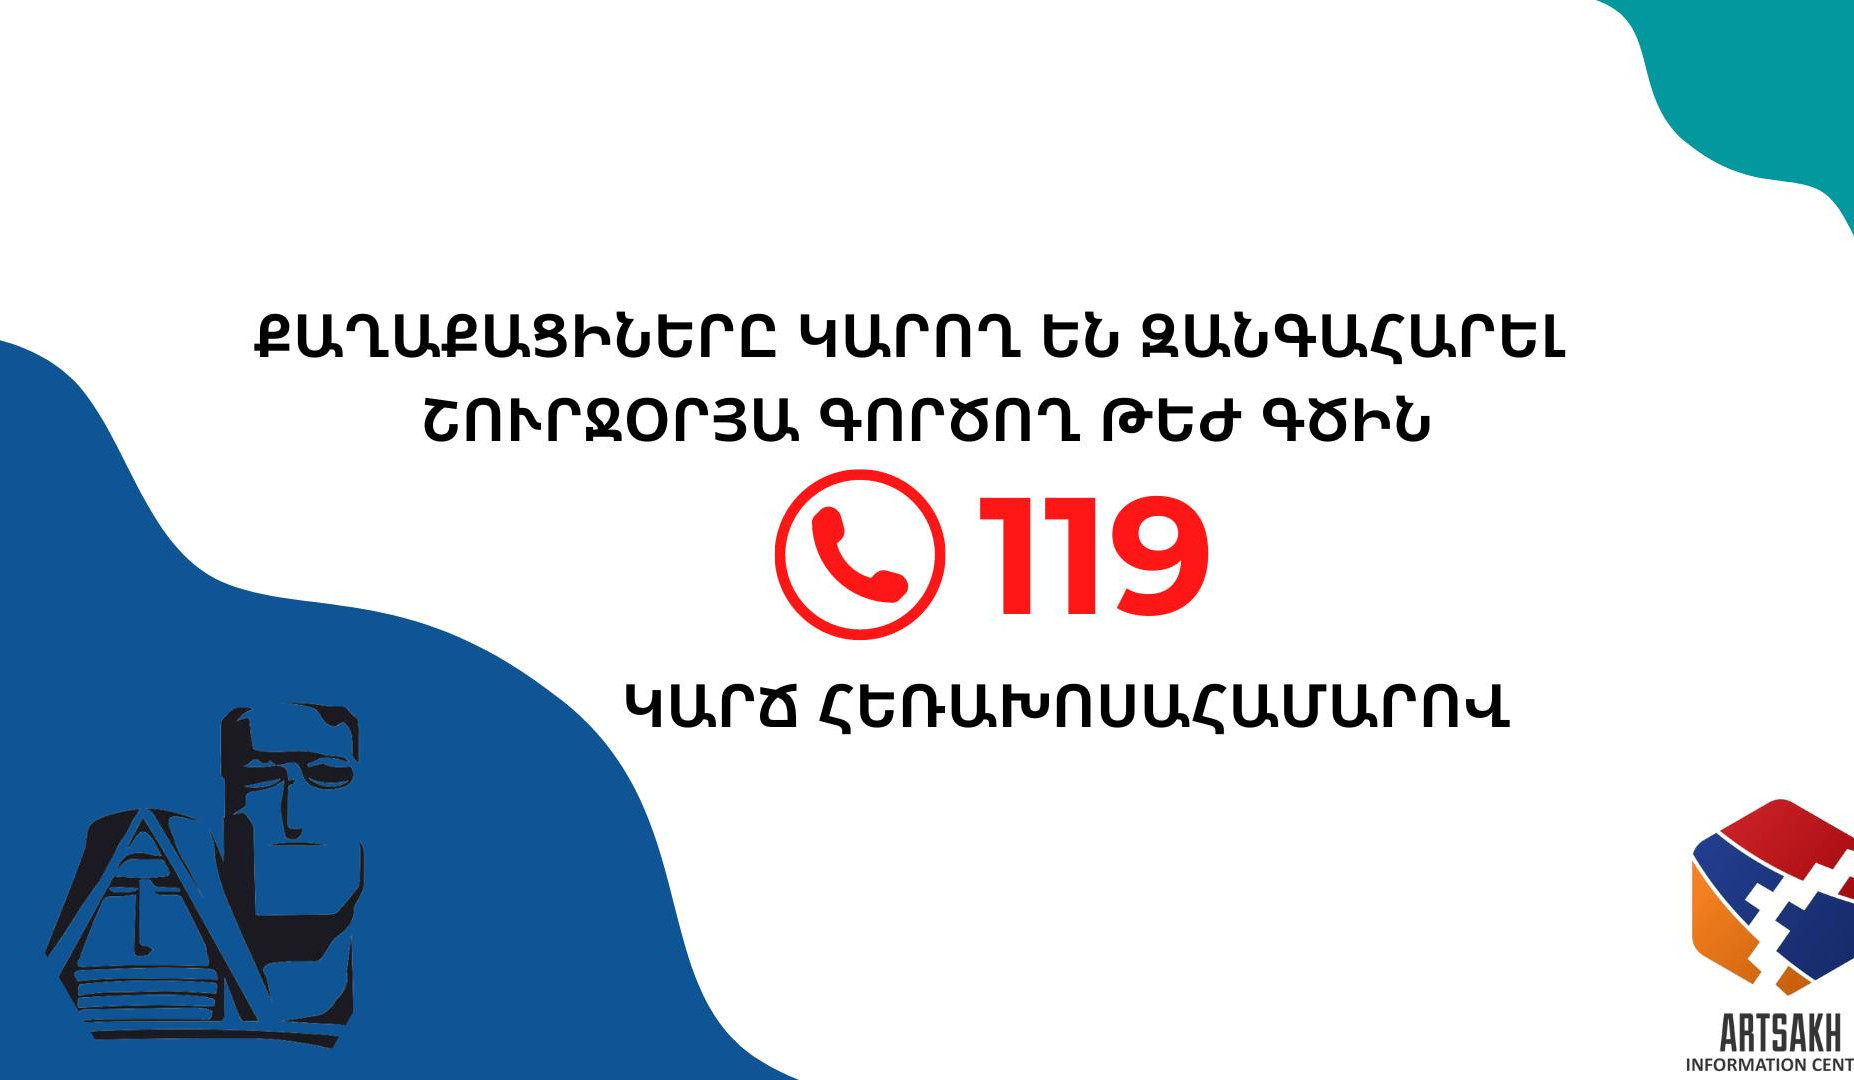 Round-the-clock hotline is available to ensure operational communication with citizens: Artsakh operational headquarters